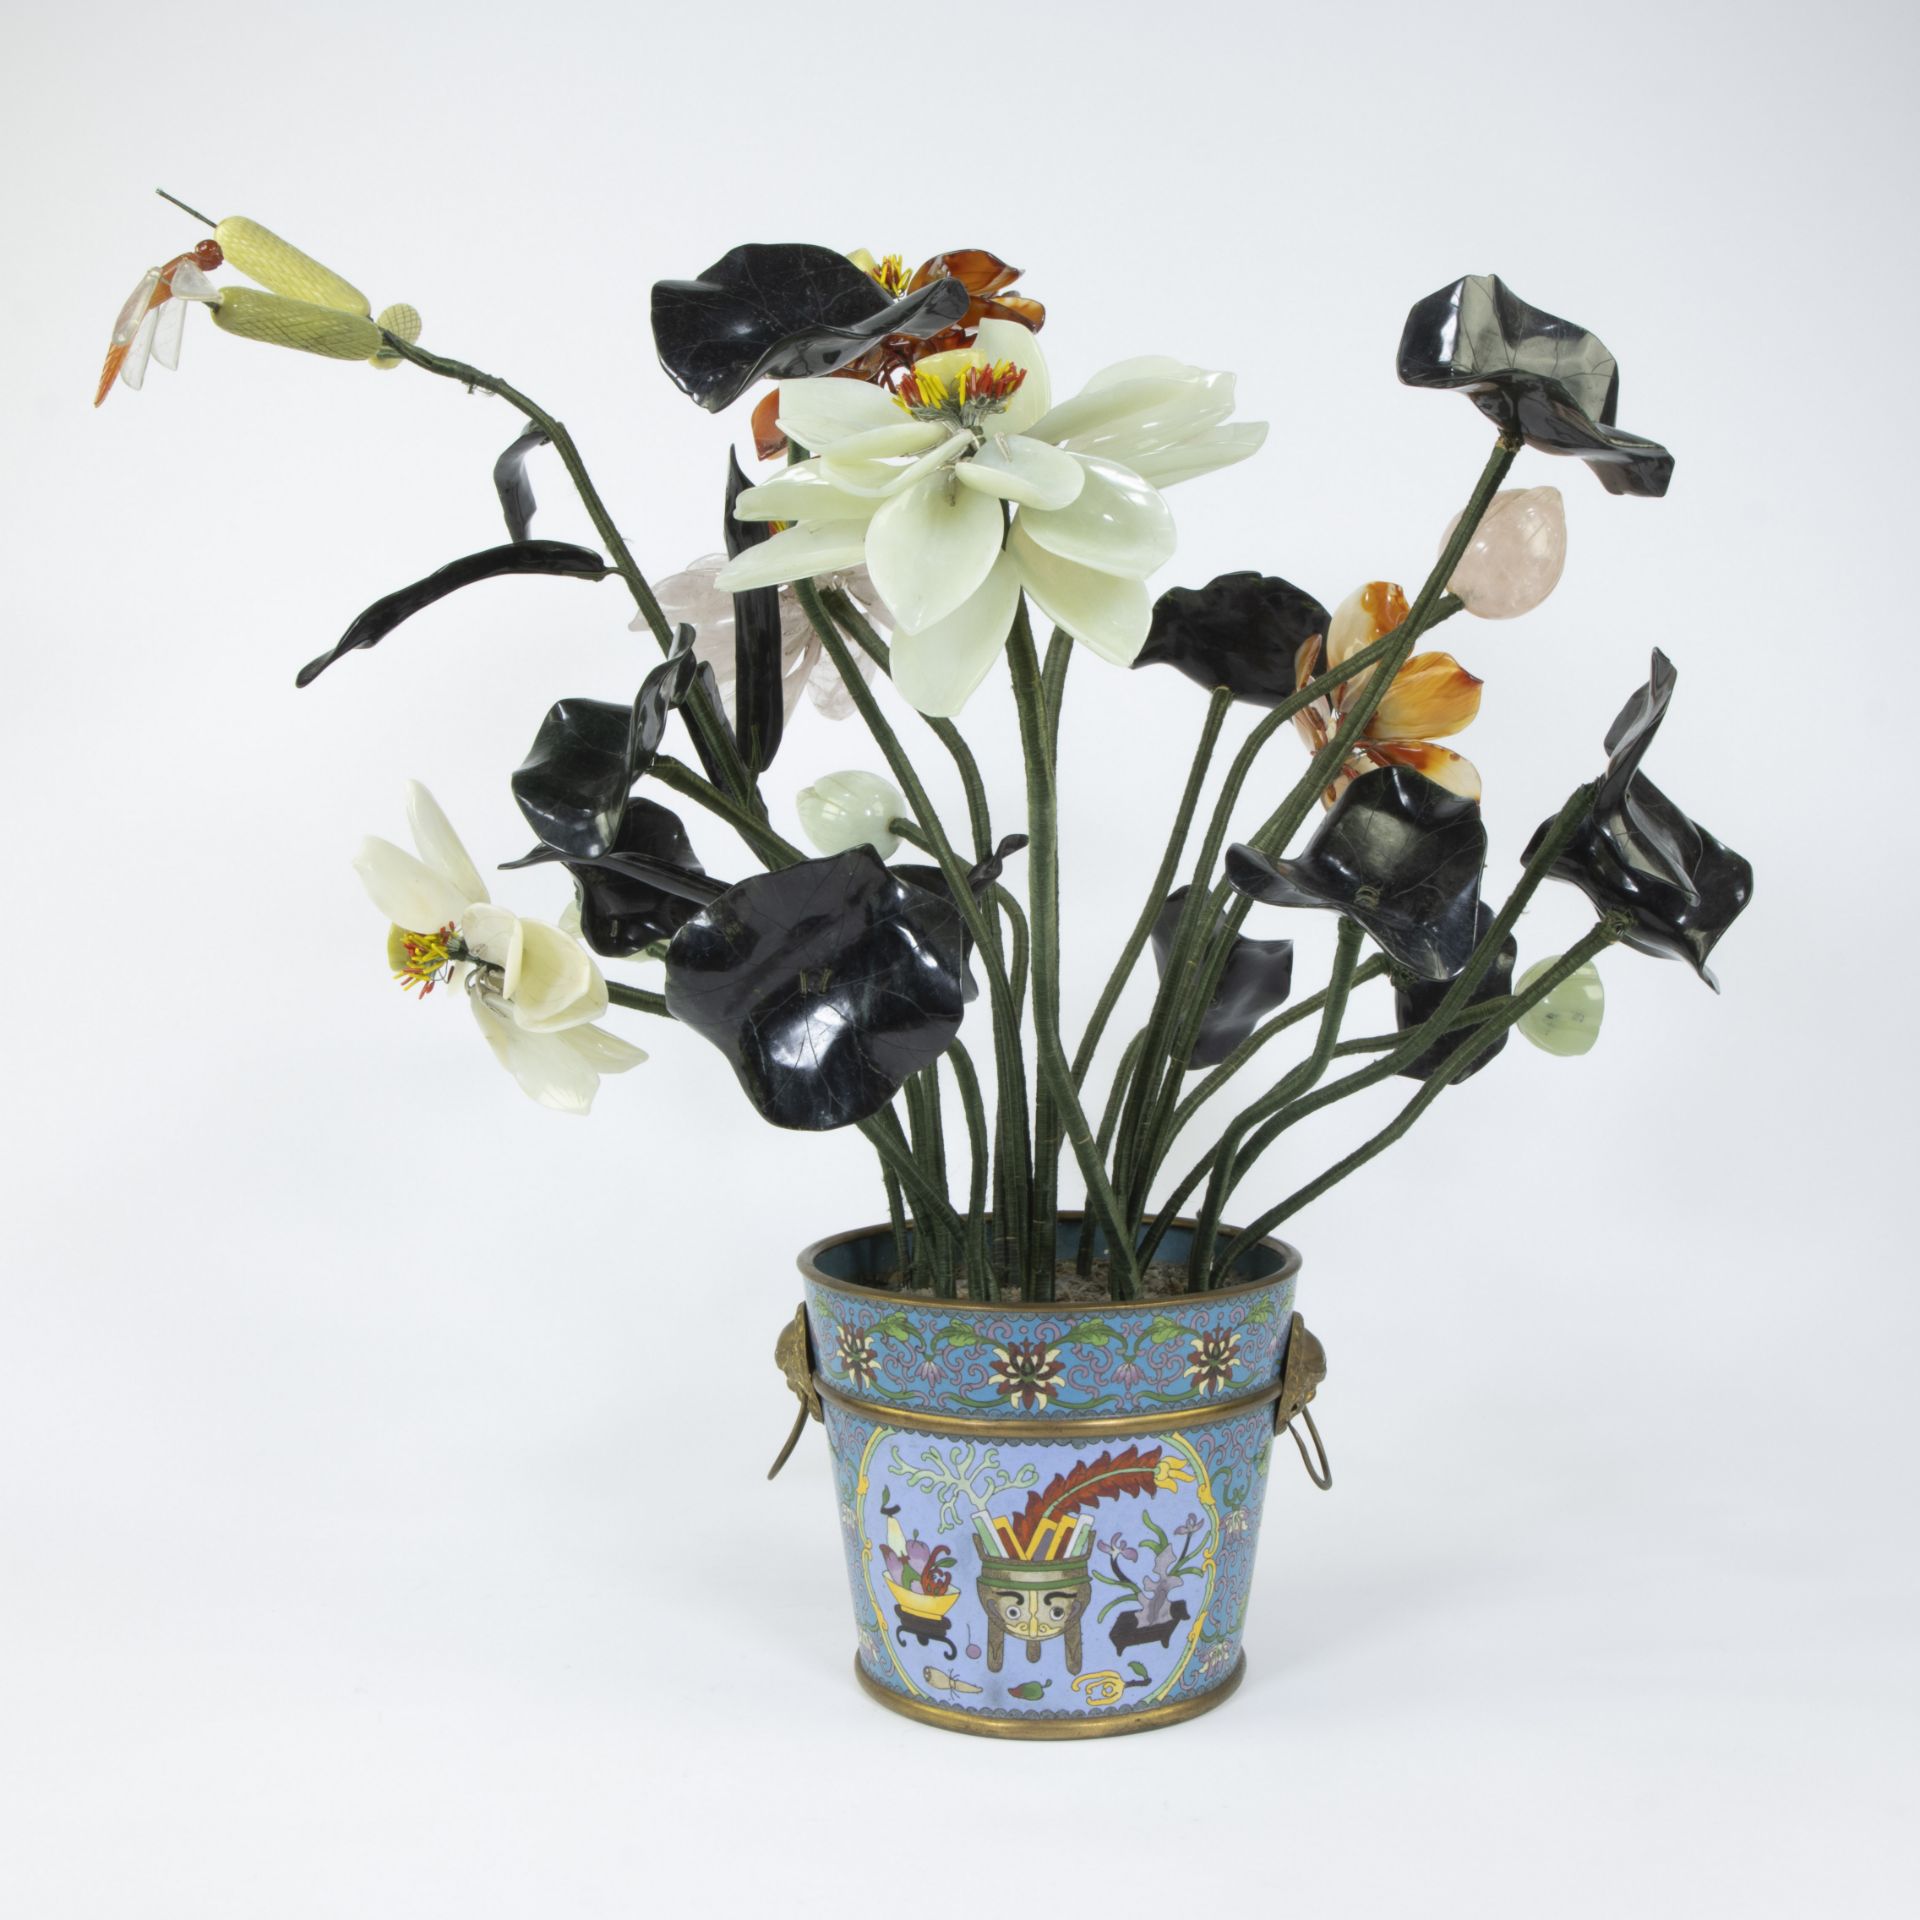 Gilt bronze Chinese cloisonne pot with a floral arrangement and dragonfly of hand-carved quartz glas - Image 3 of 5